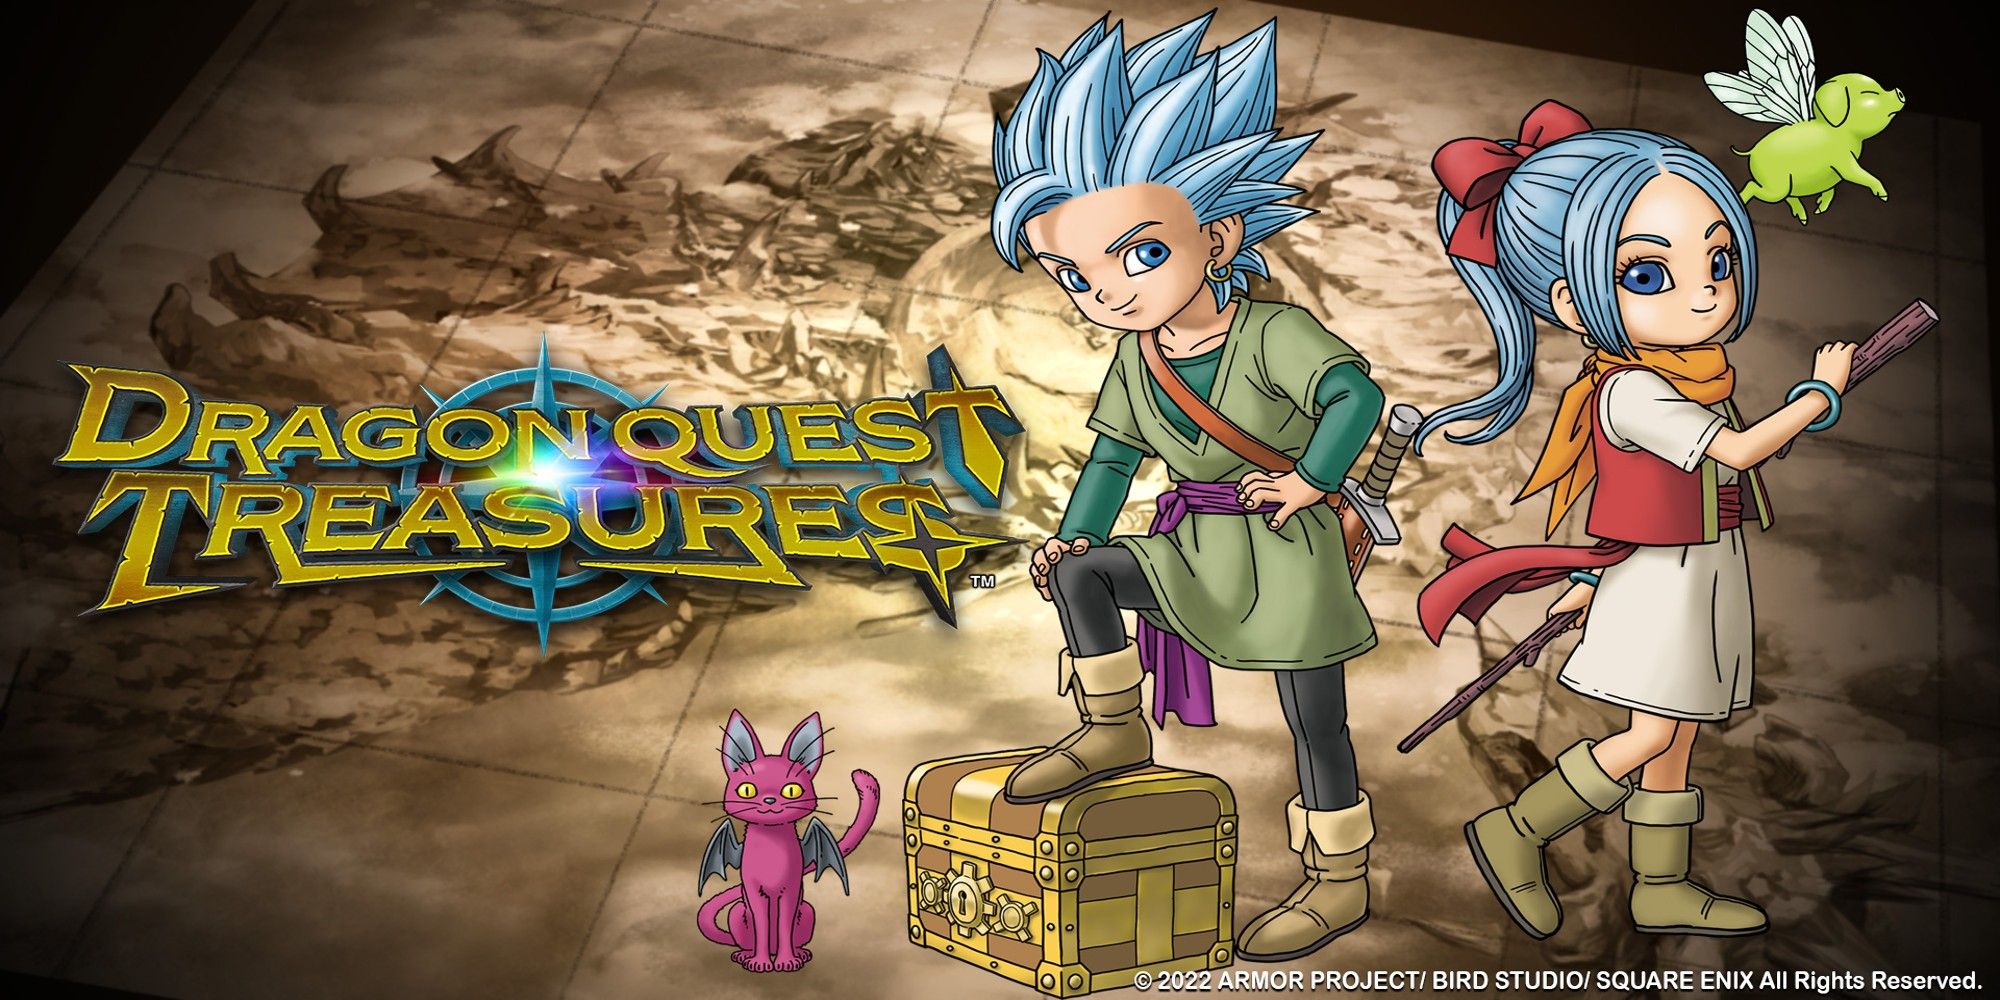 Dragon Quest Treasures Key Art showing the main characters with treasure.